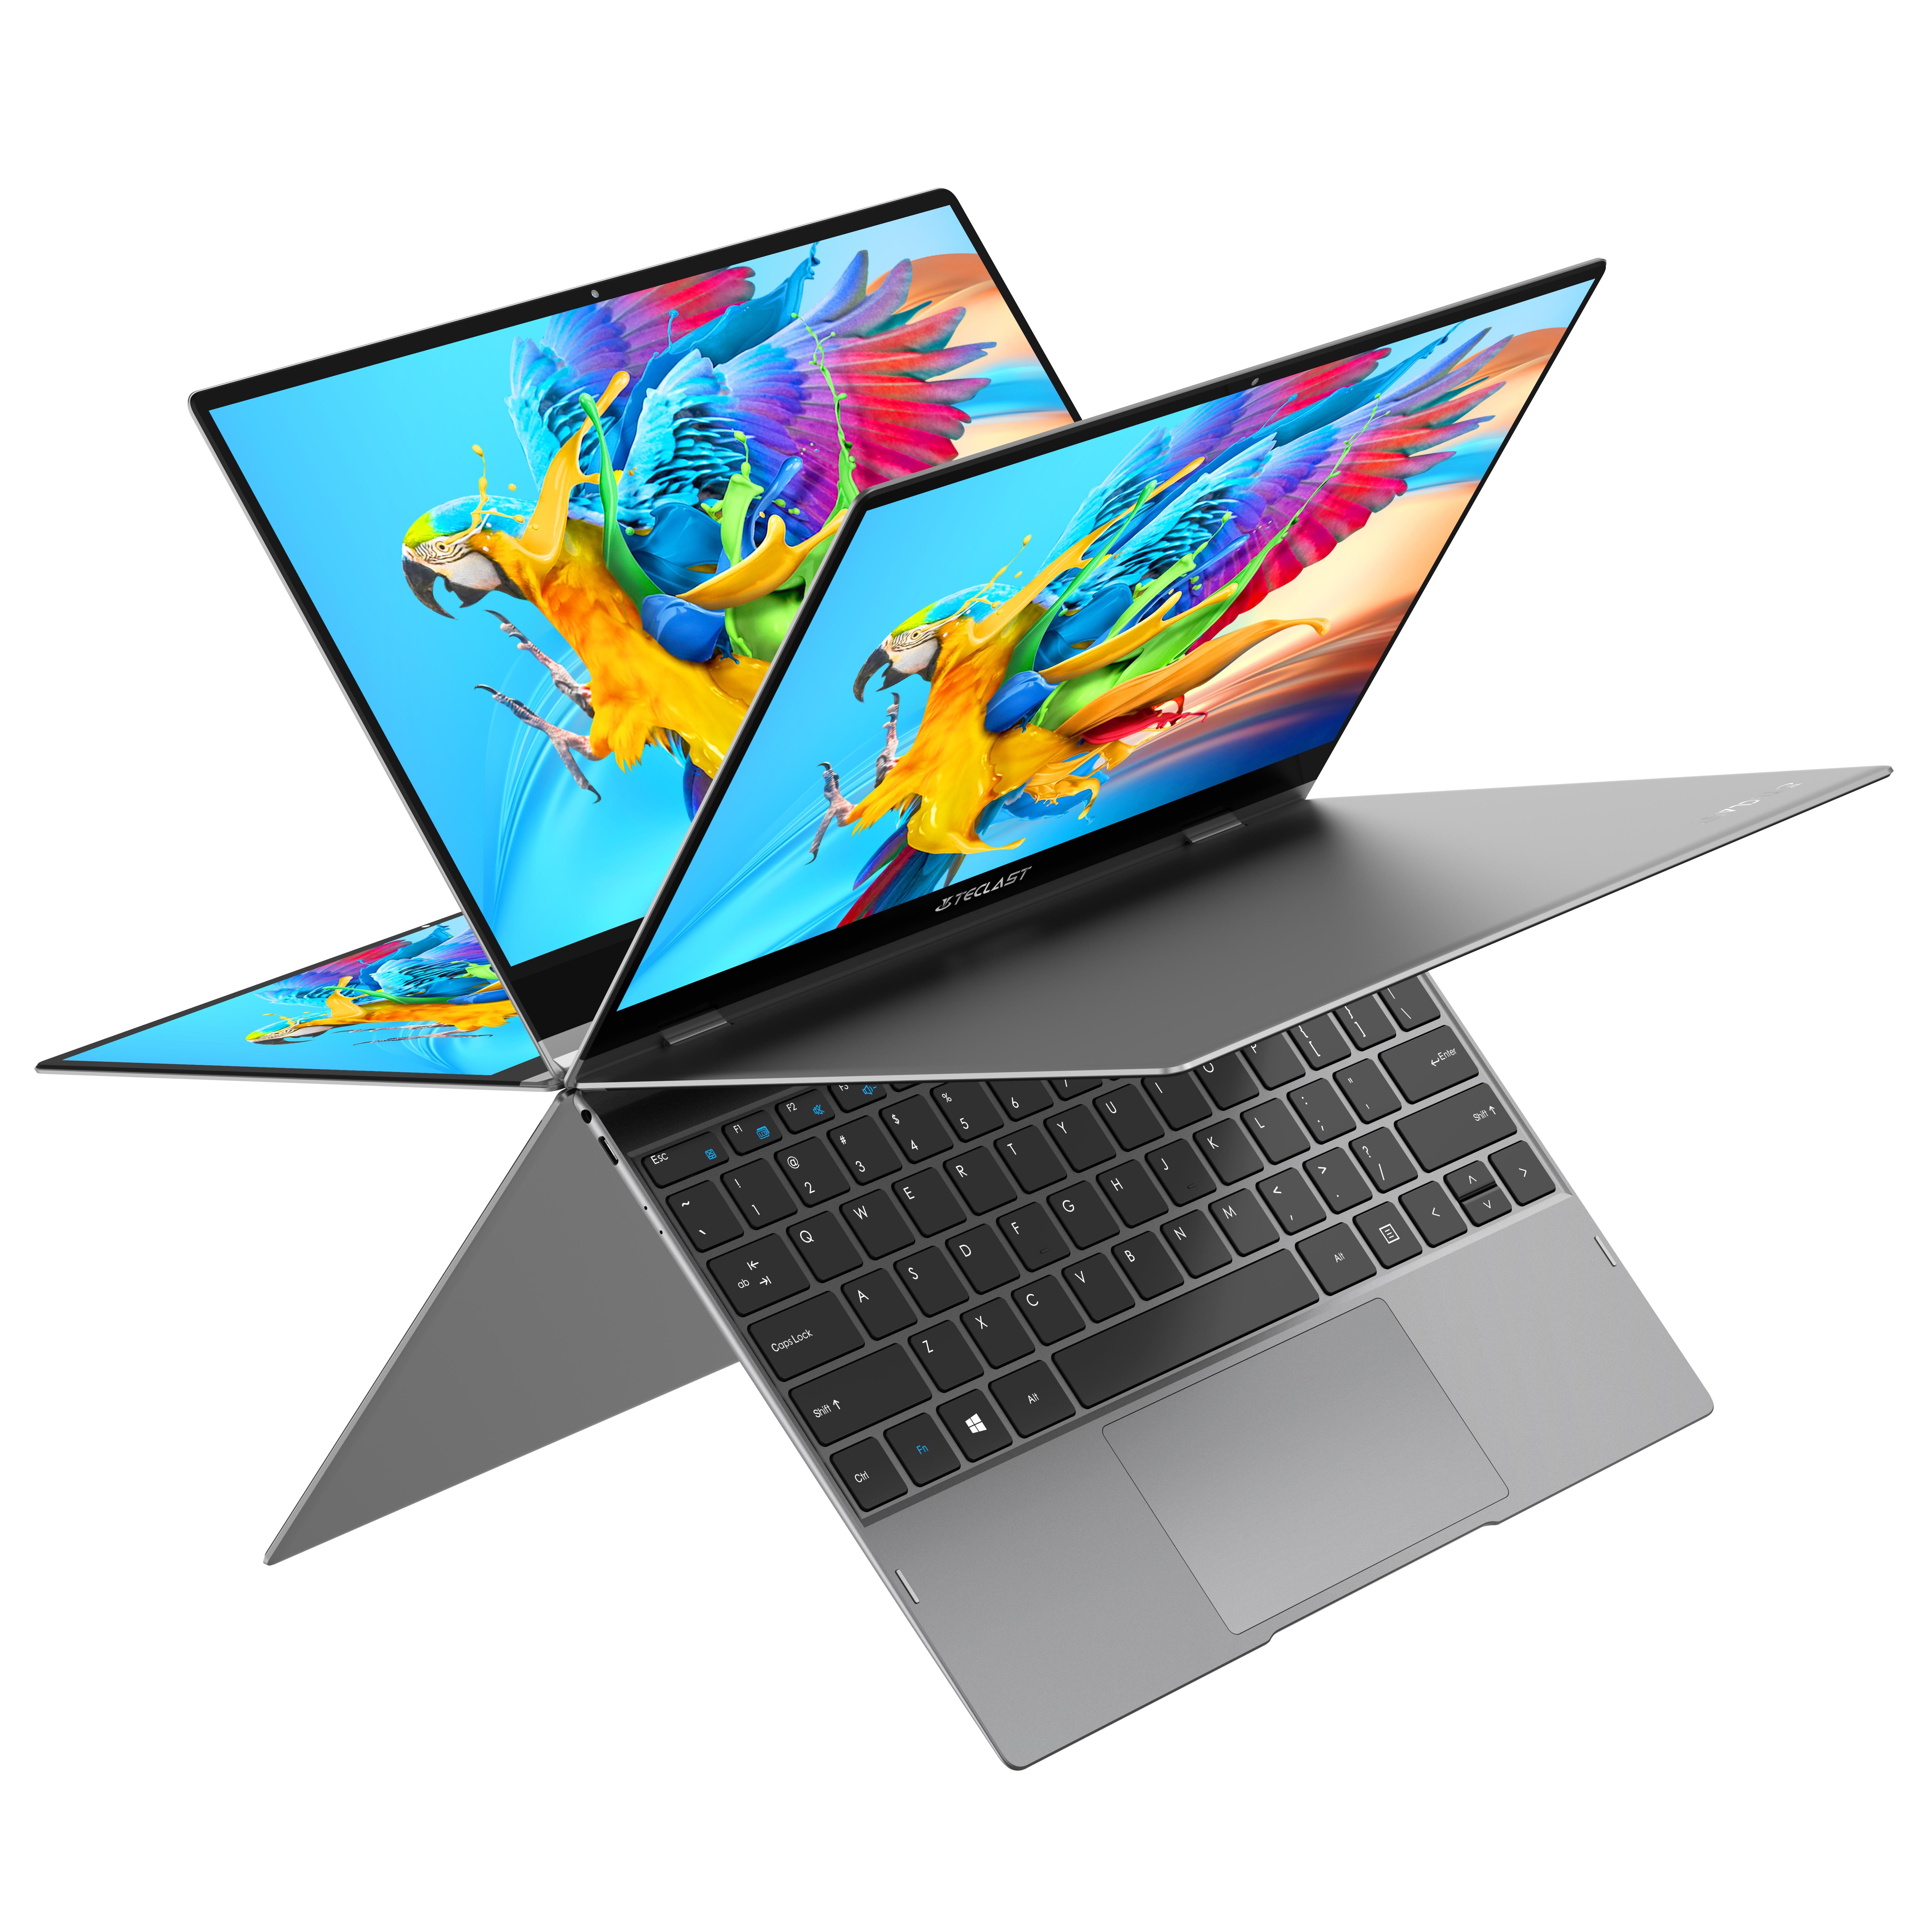 Image of Teclast F6 Air Laptop 133 inch 360° Rotating Touch Screen Intel N4100 Quad-Core 8GB LPDDR4 RAM 256GB SSD 418Wh Batery